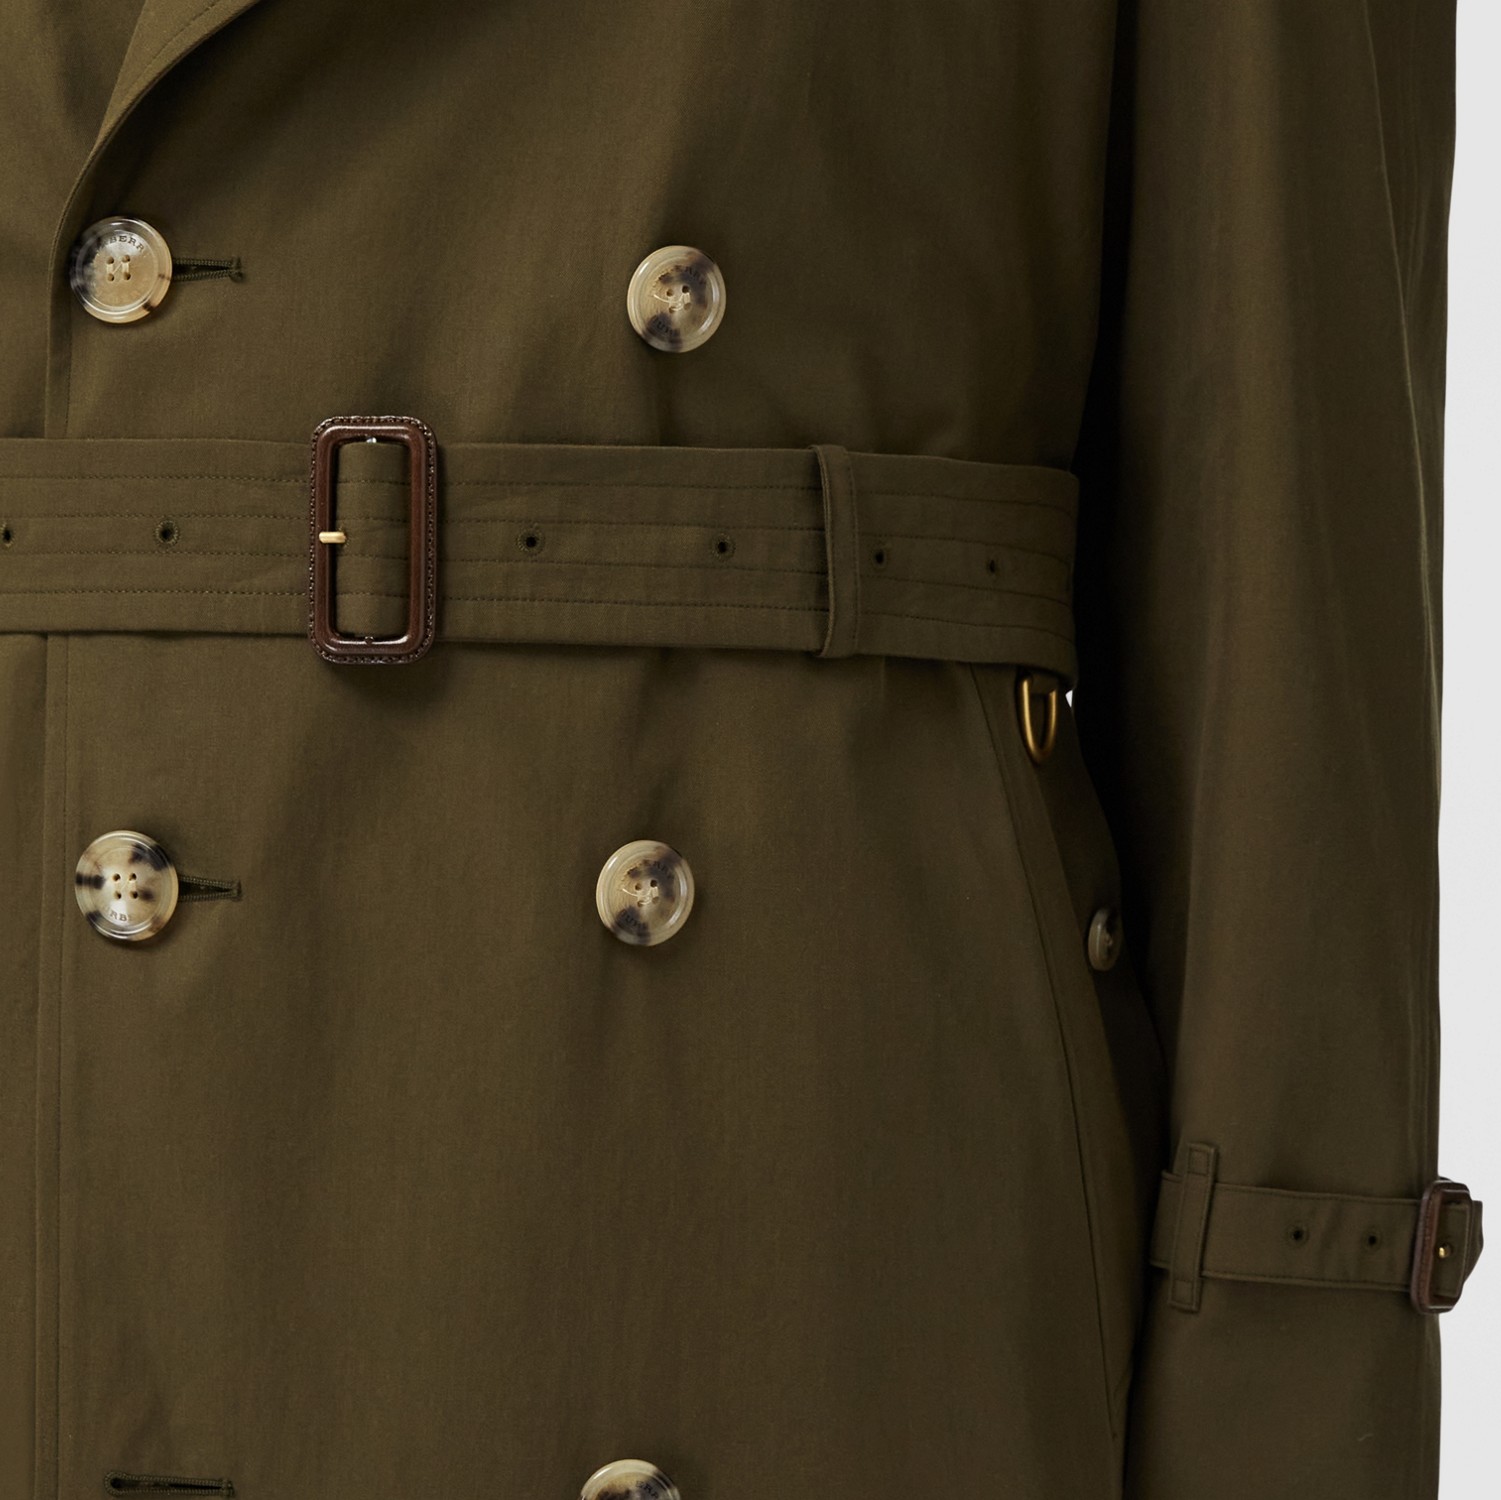 The Westminster Heritage Trench Coat in Dark Military Khaki - Men | Burberry® Official